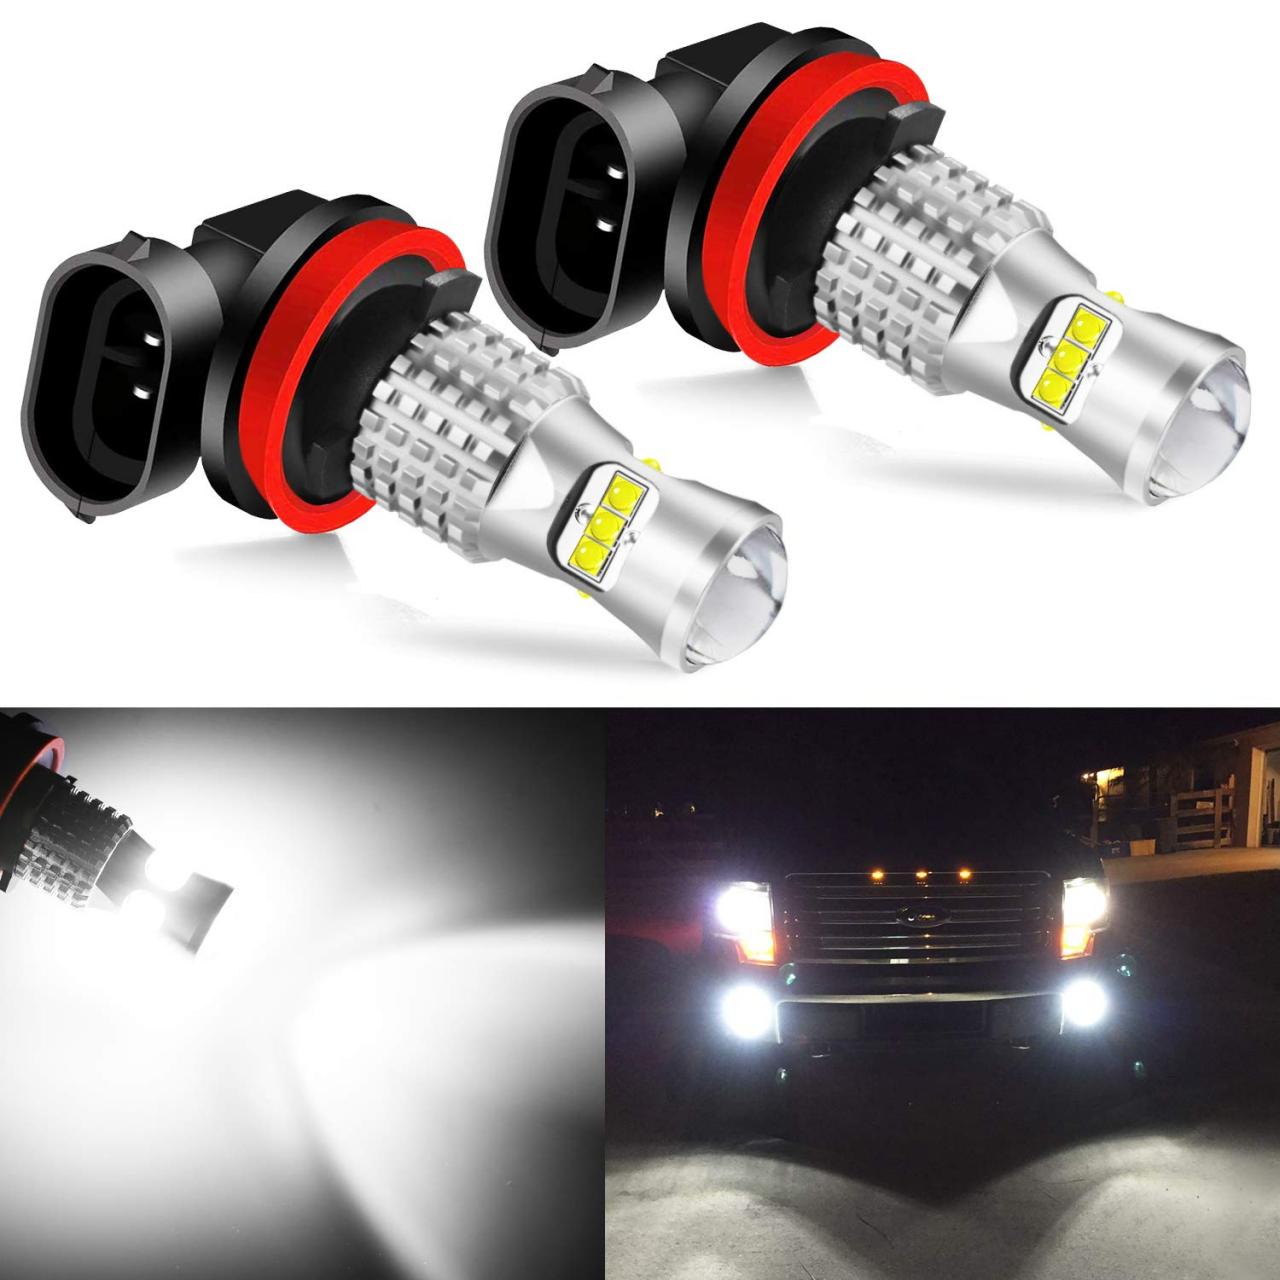 JDM ASTAR Super Bright Max 60W High Power 4G12 360 Beam H11 H16 White Led  Fog Light Bulbs With Projector- Buy Online in Japan at desertcart.jp.  ProductId : 225182181.